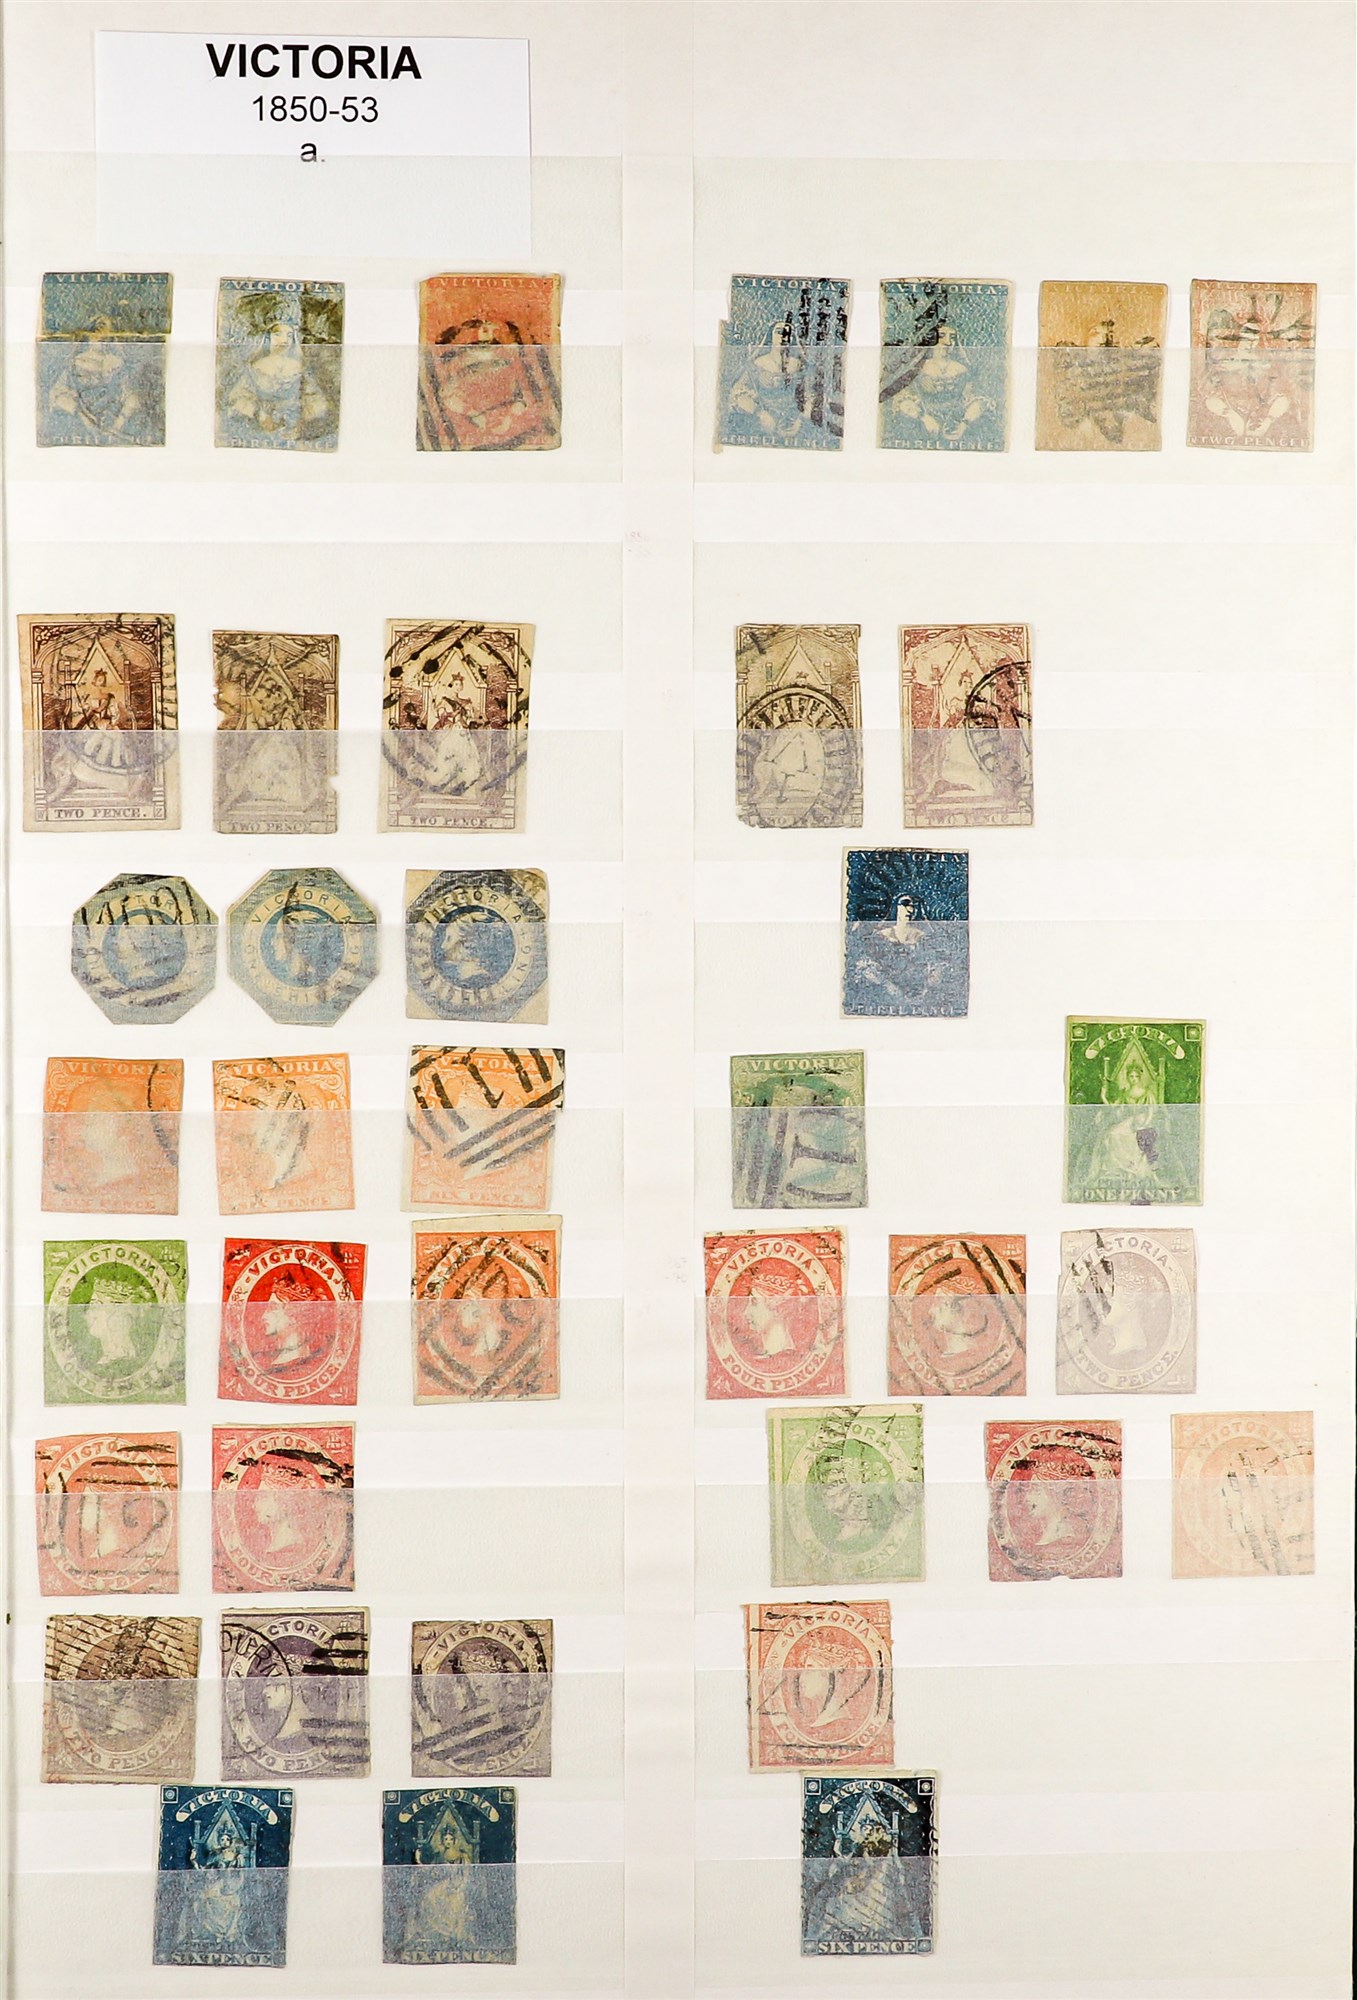 AUSTRALIAN STATES VICTORIA 1850 - 1911 COLLECTION of around 400 chiefly used stamps on protective